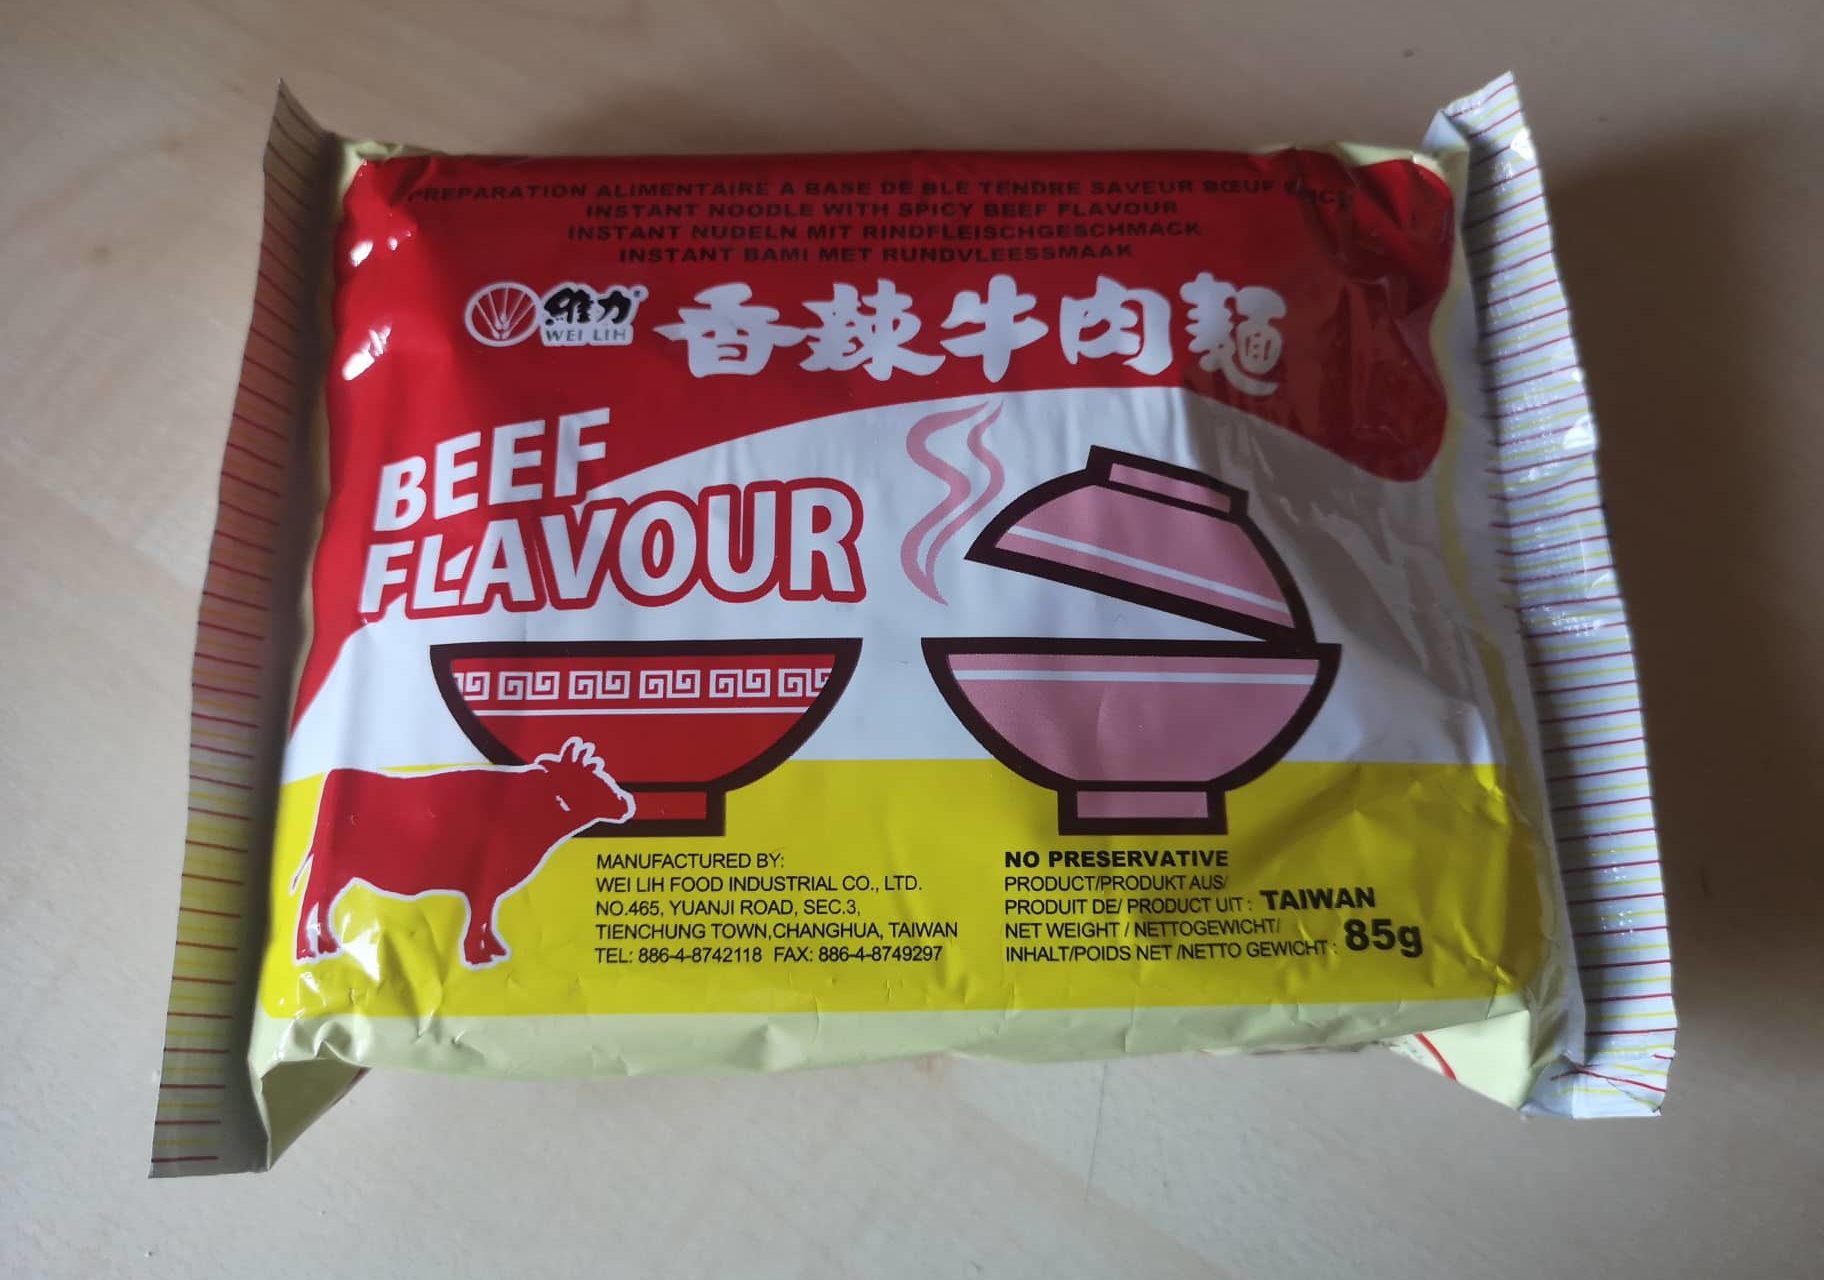 #1665: Wei Lih "Instant Noodles with Spicy Beef Flavour" (Update 2022)